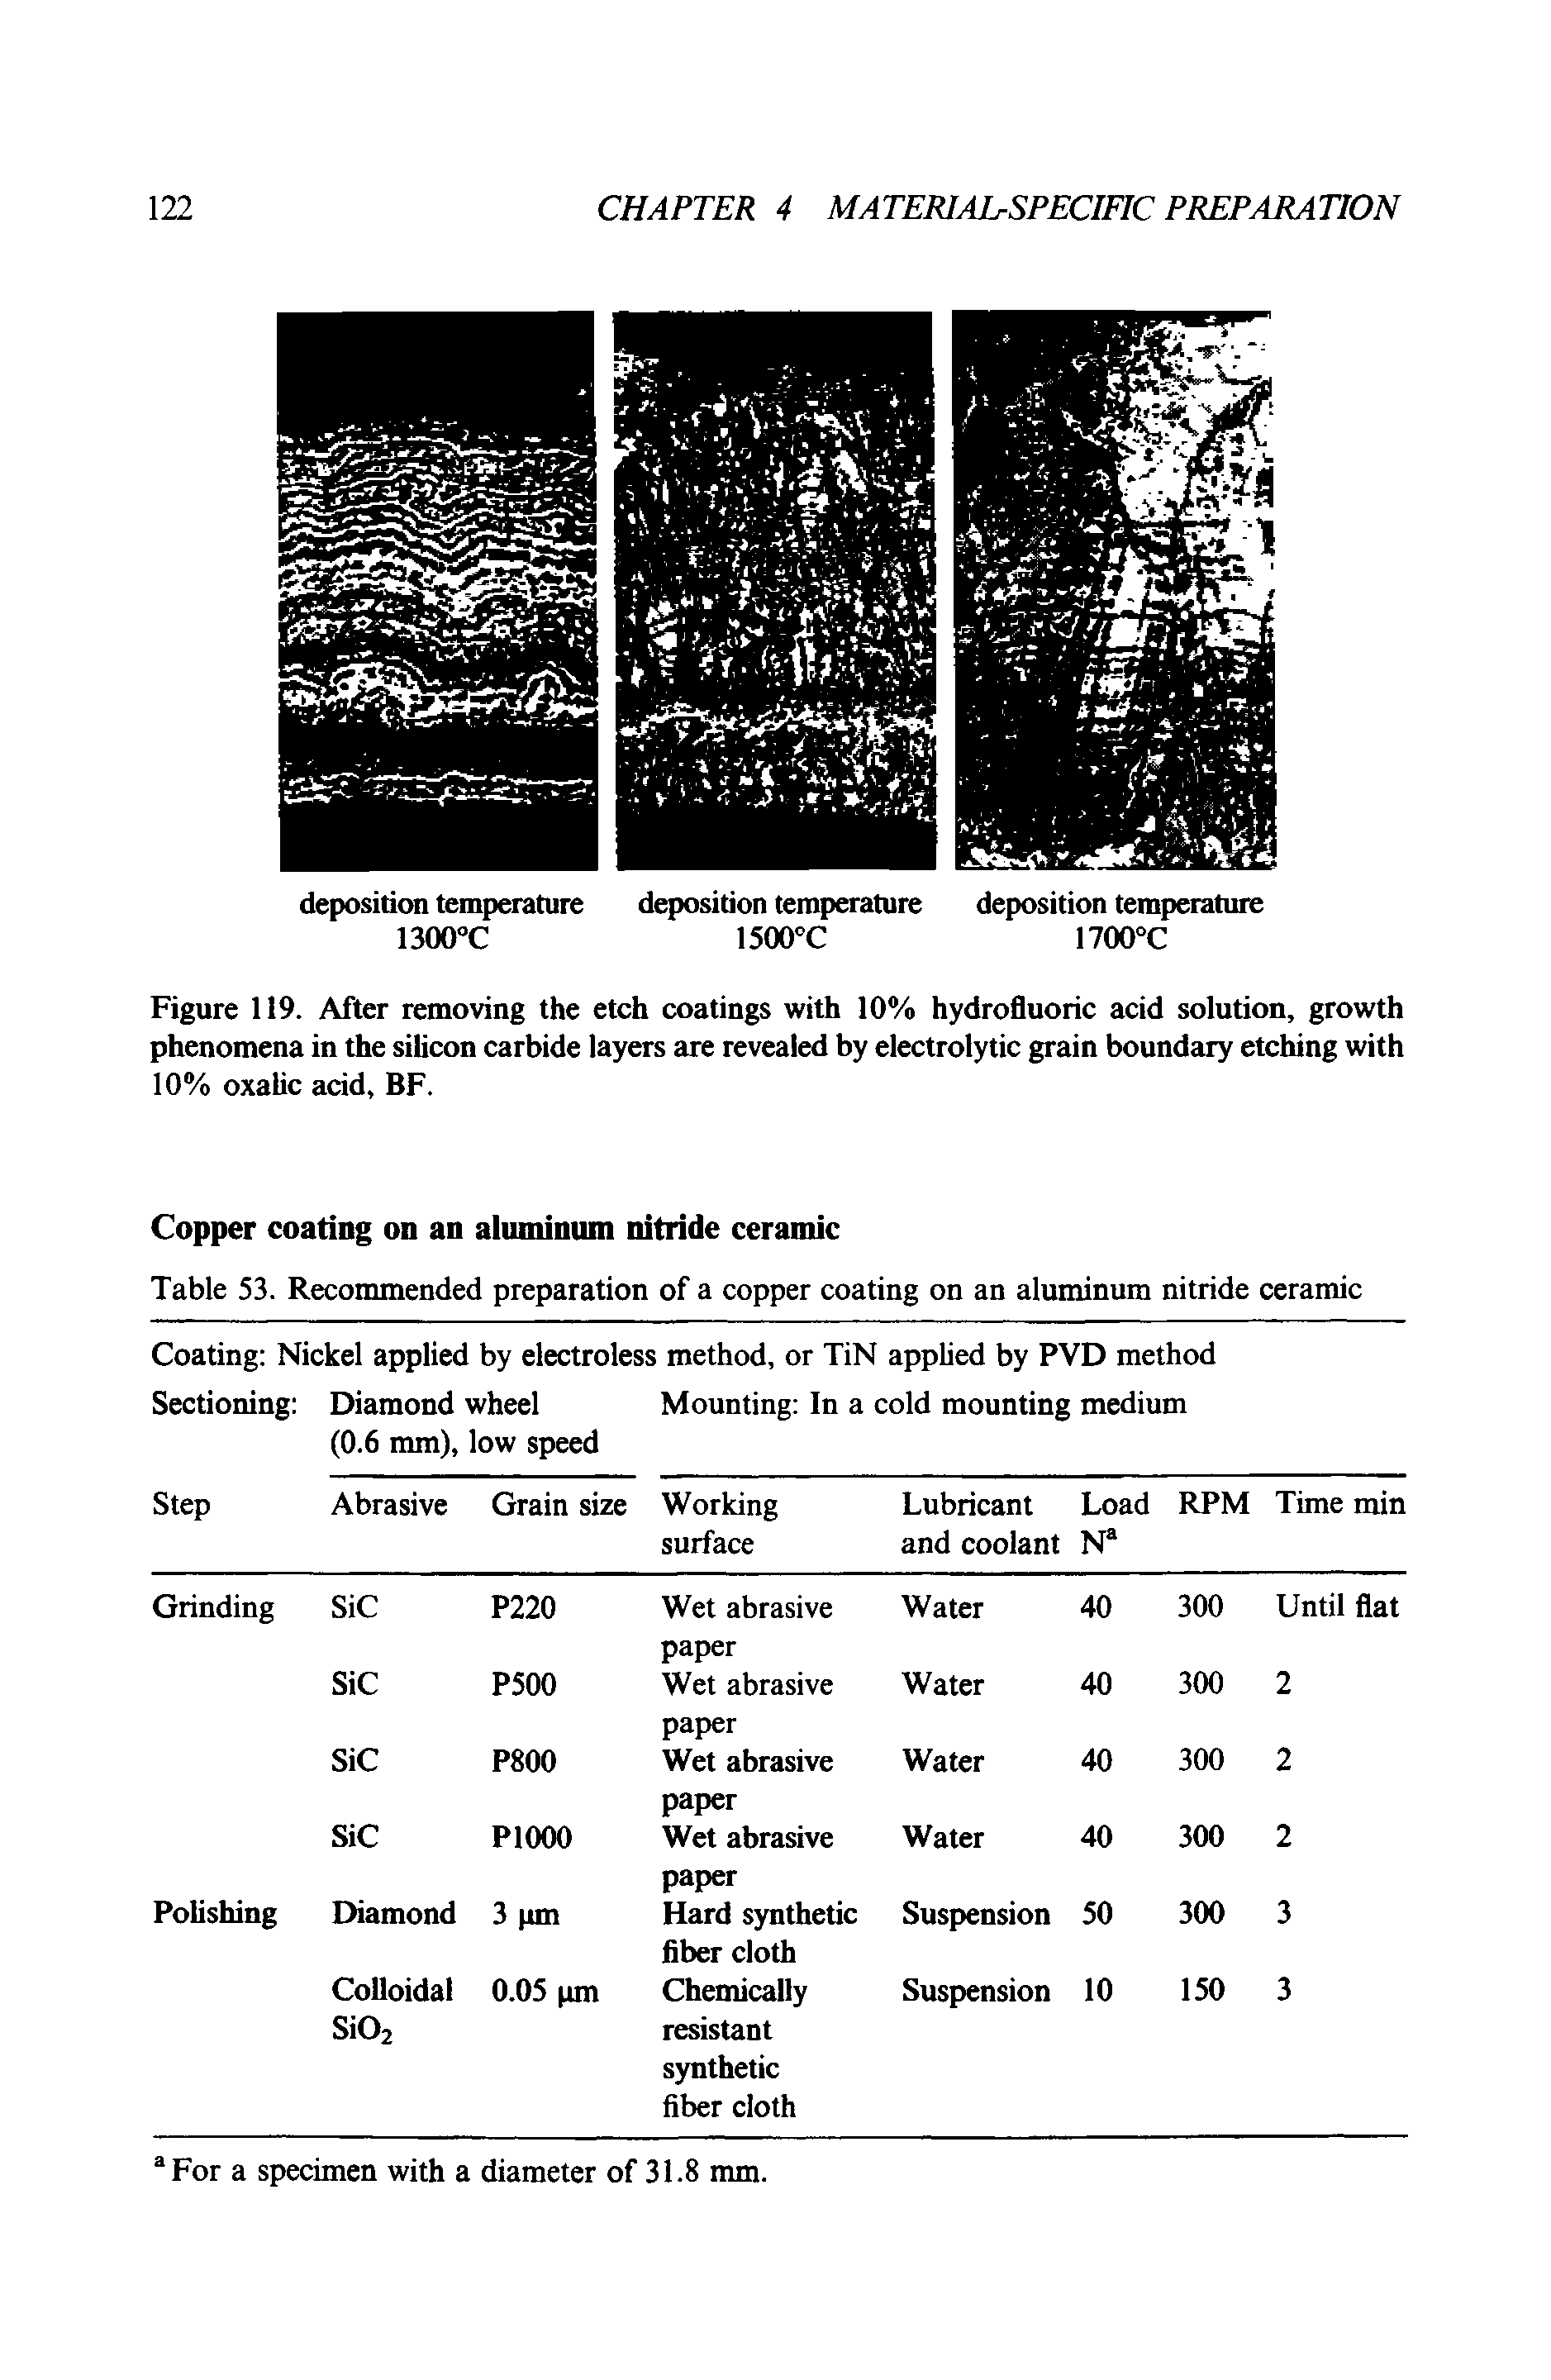 Figure 119. After removing the etch coatings with 10% hydrofluoric acid solution, growth phenomena in the silicon carbide layers are revealed by electrolytic grain boundary etching with 10% oxalic acid, BF.